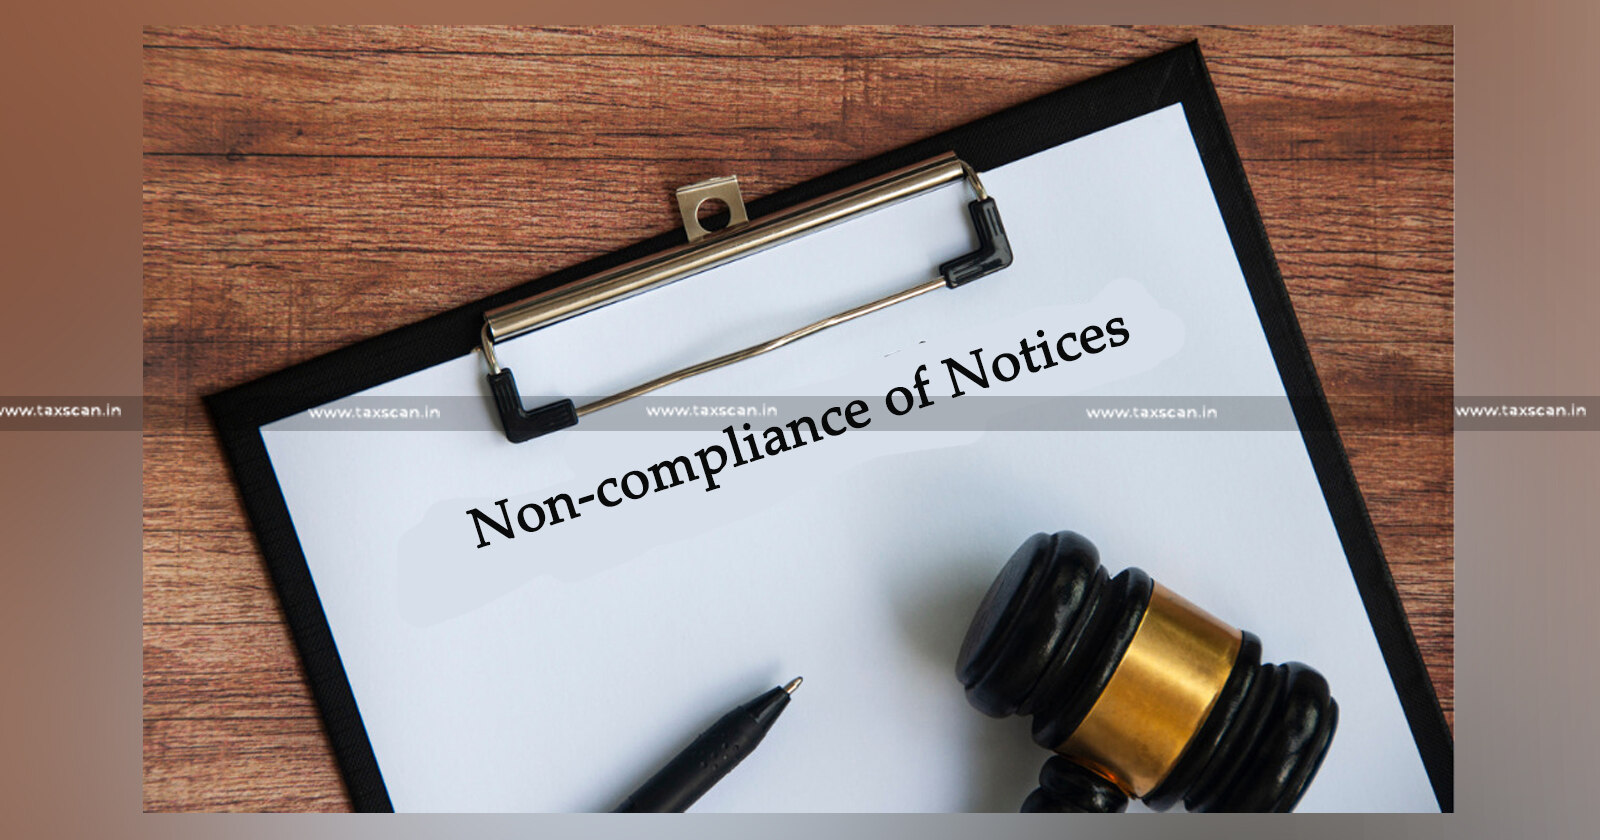 Non-compliance of Notices - Notices - Non-compliance - ITAT - Assessee - taxscan